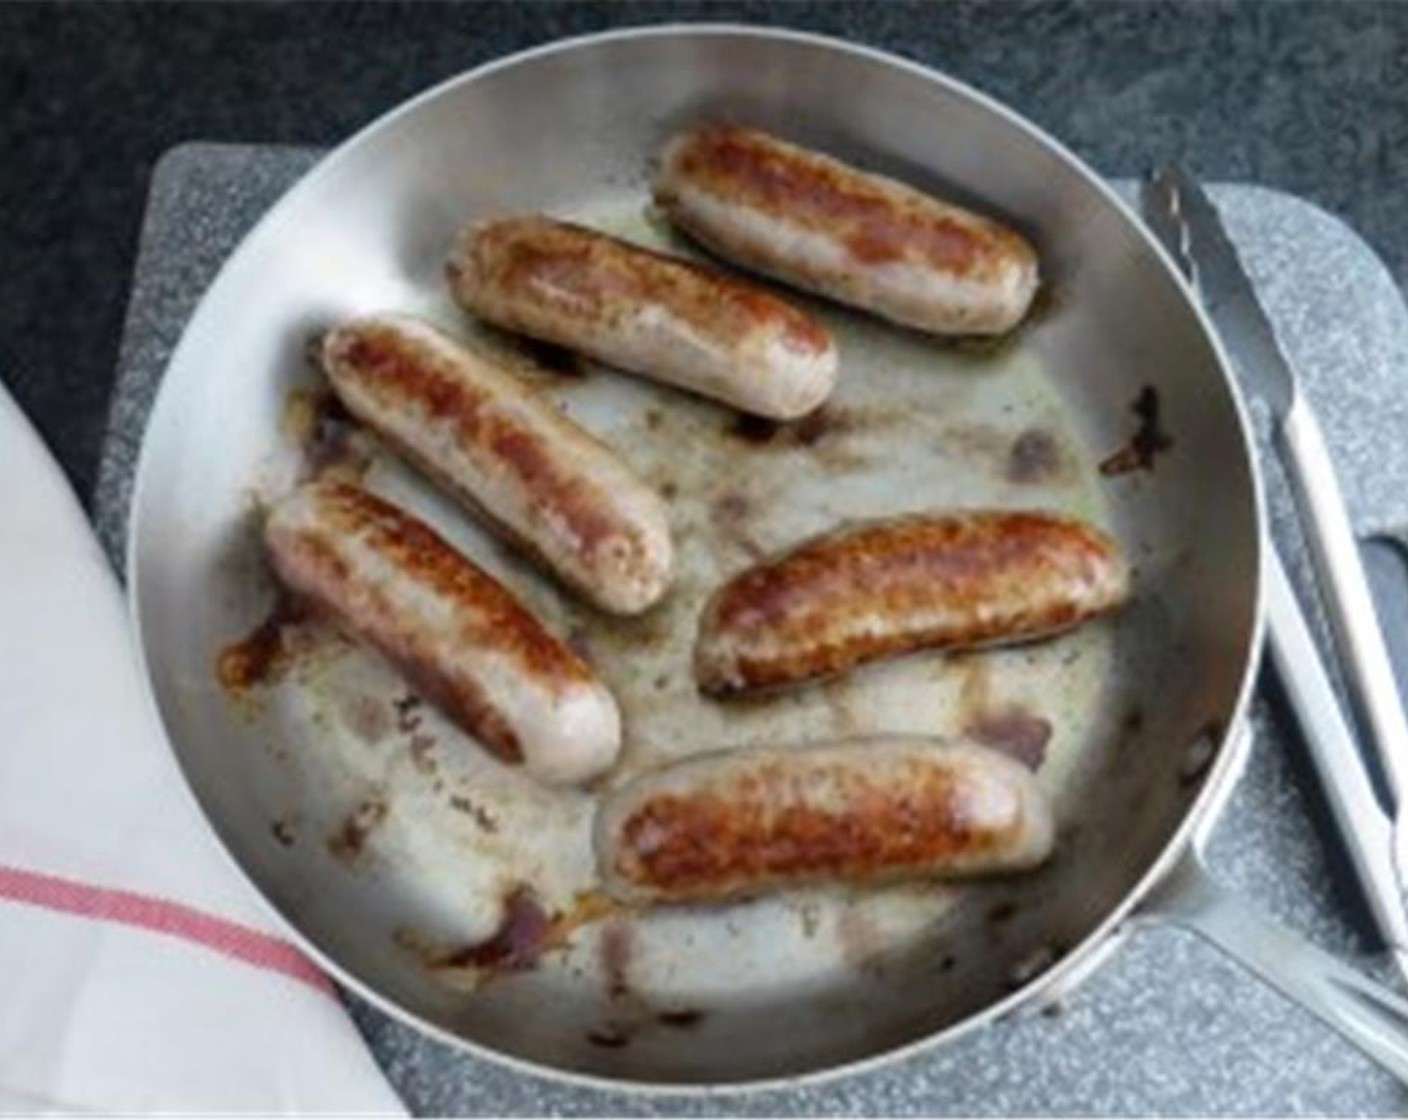 step 5 Meanwhile, in a large skillet, add Olive Oil (1 Tbsp) and heat over medium-high flame. Keep the casings on the Italian Sausage Link (1 lb) and carefully add it to the skillet (they may splatter). Cook for a few minutes on each side until they are browned on several sides.